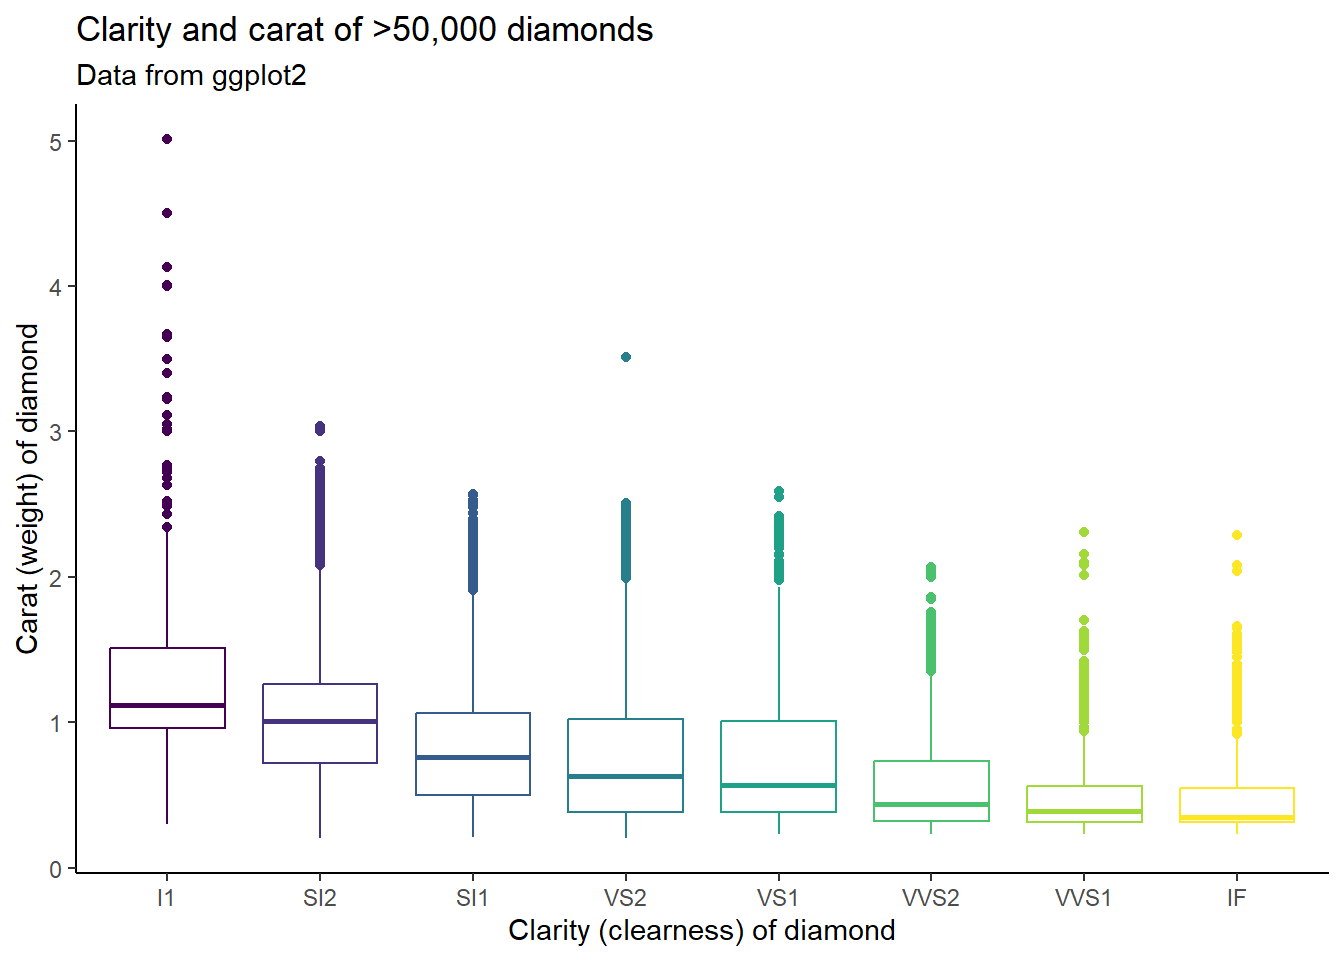 A ggplot object with a geom_boxplot, the carat of diamonds by their clarity